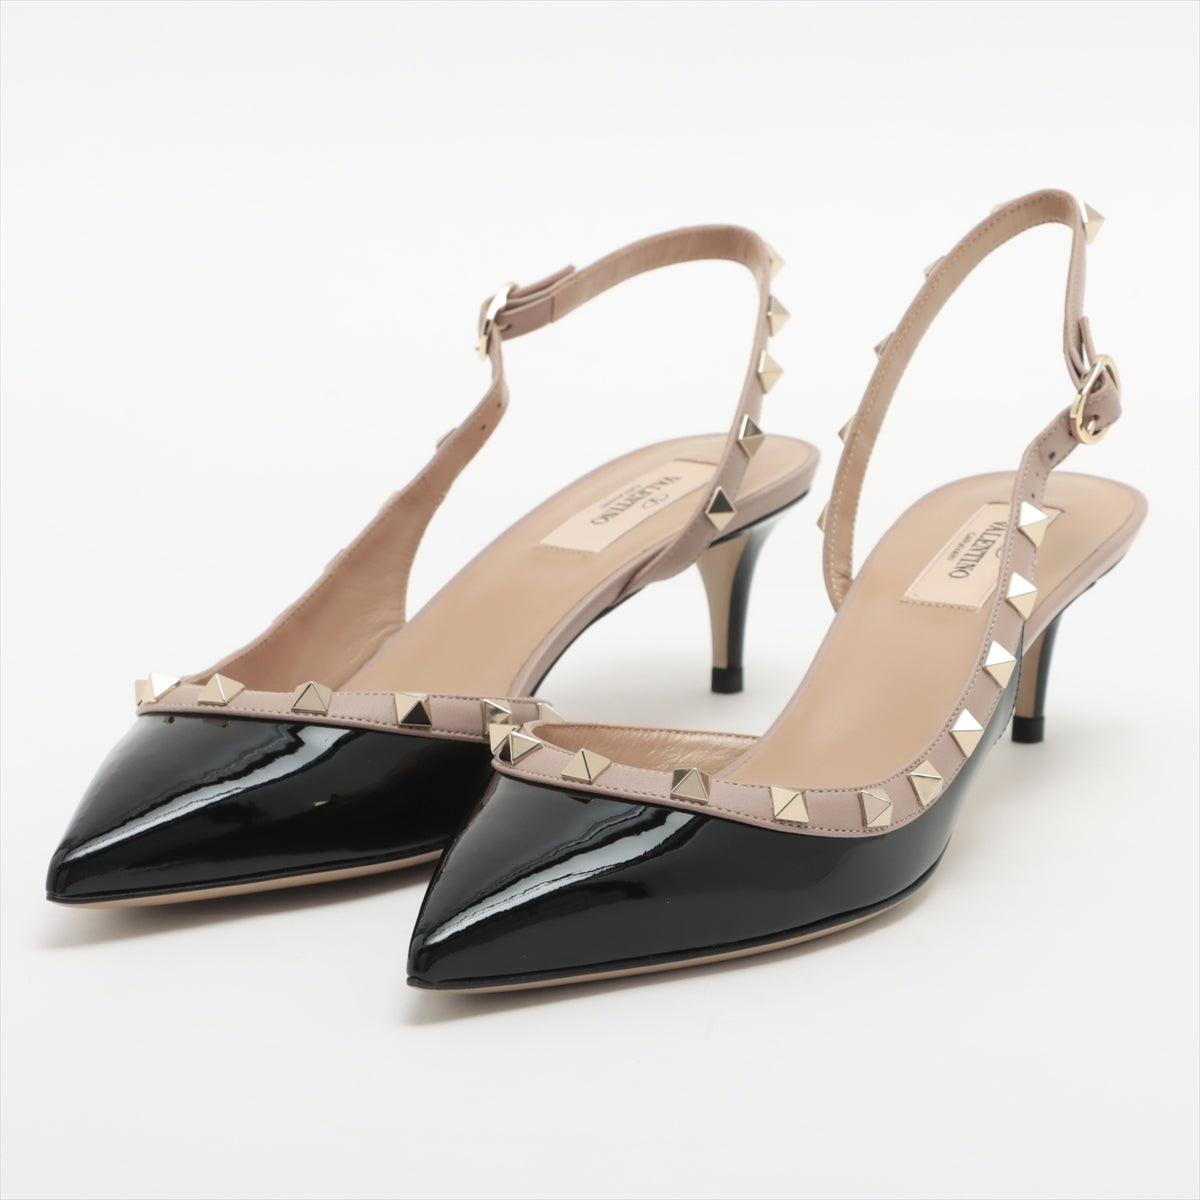 Valentino Garavani Rock Studs Patent leather Pumps 40 Ladies' Black slingback box sack There are replacement lifts and replacement studs